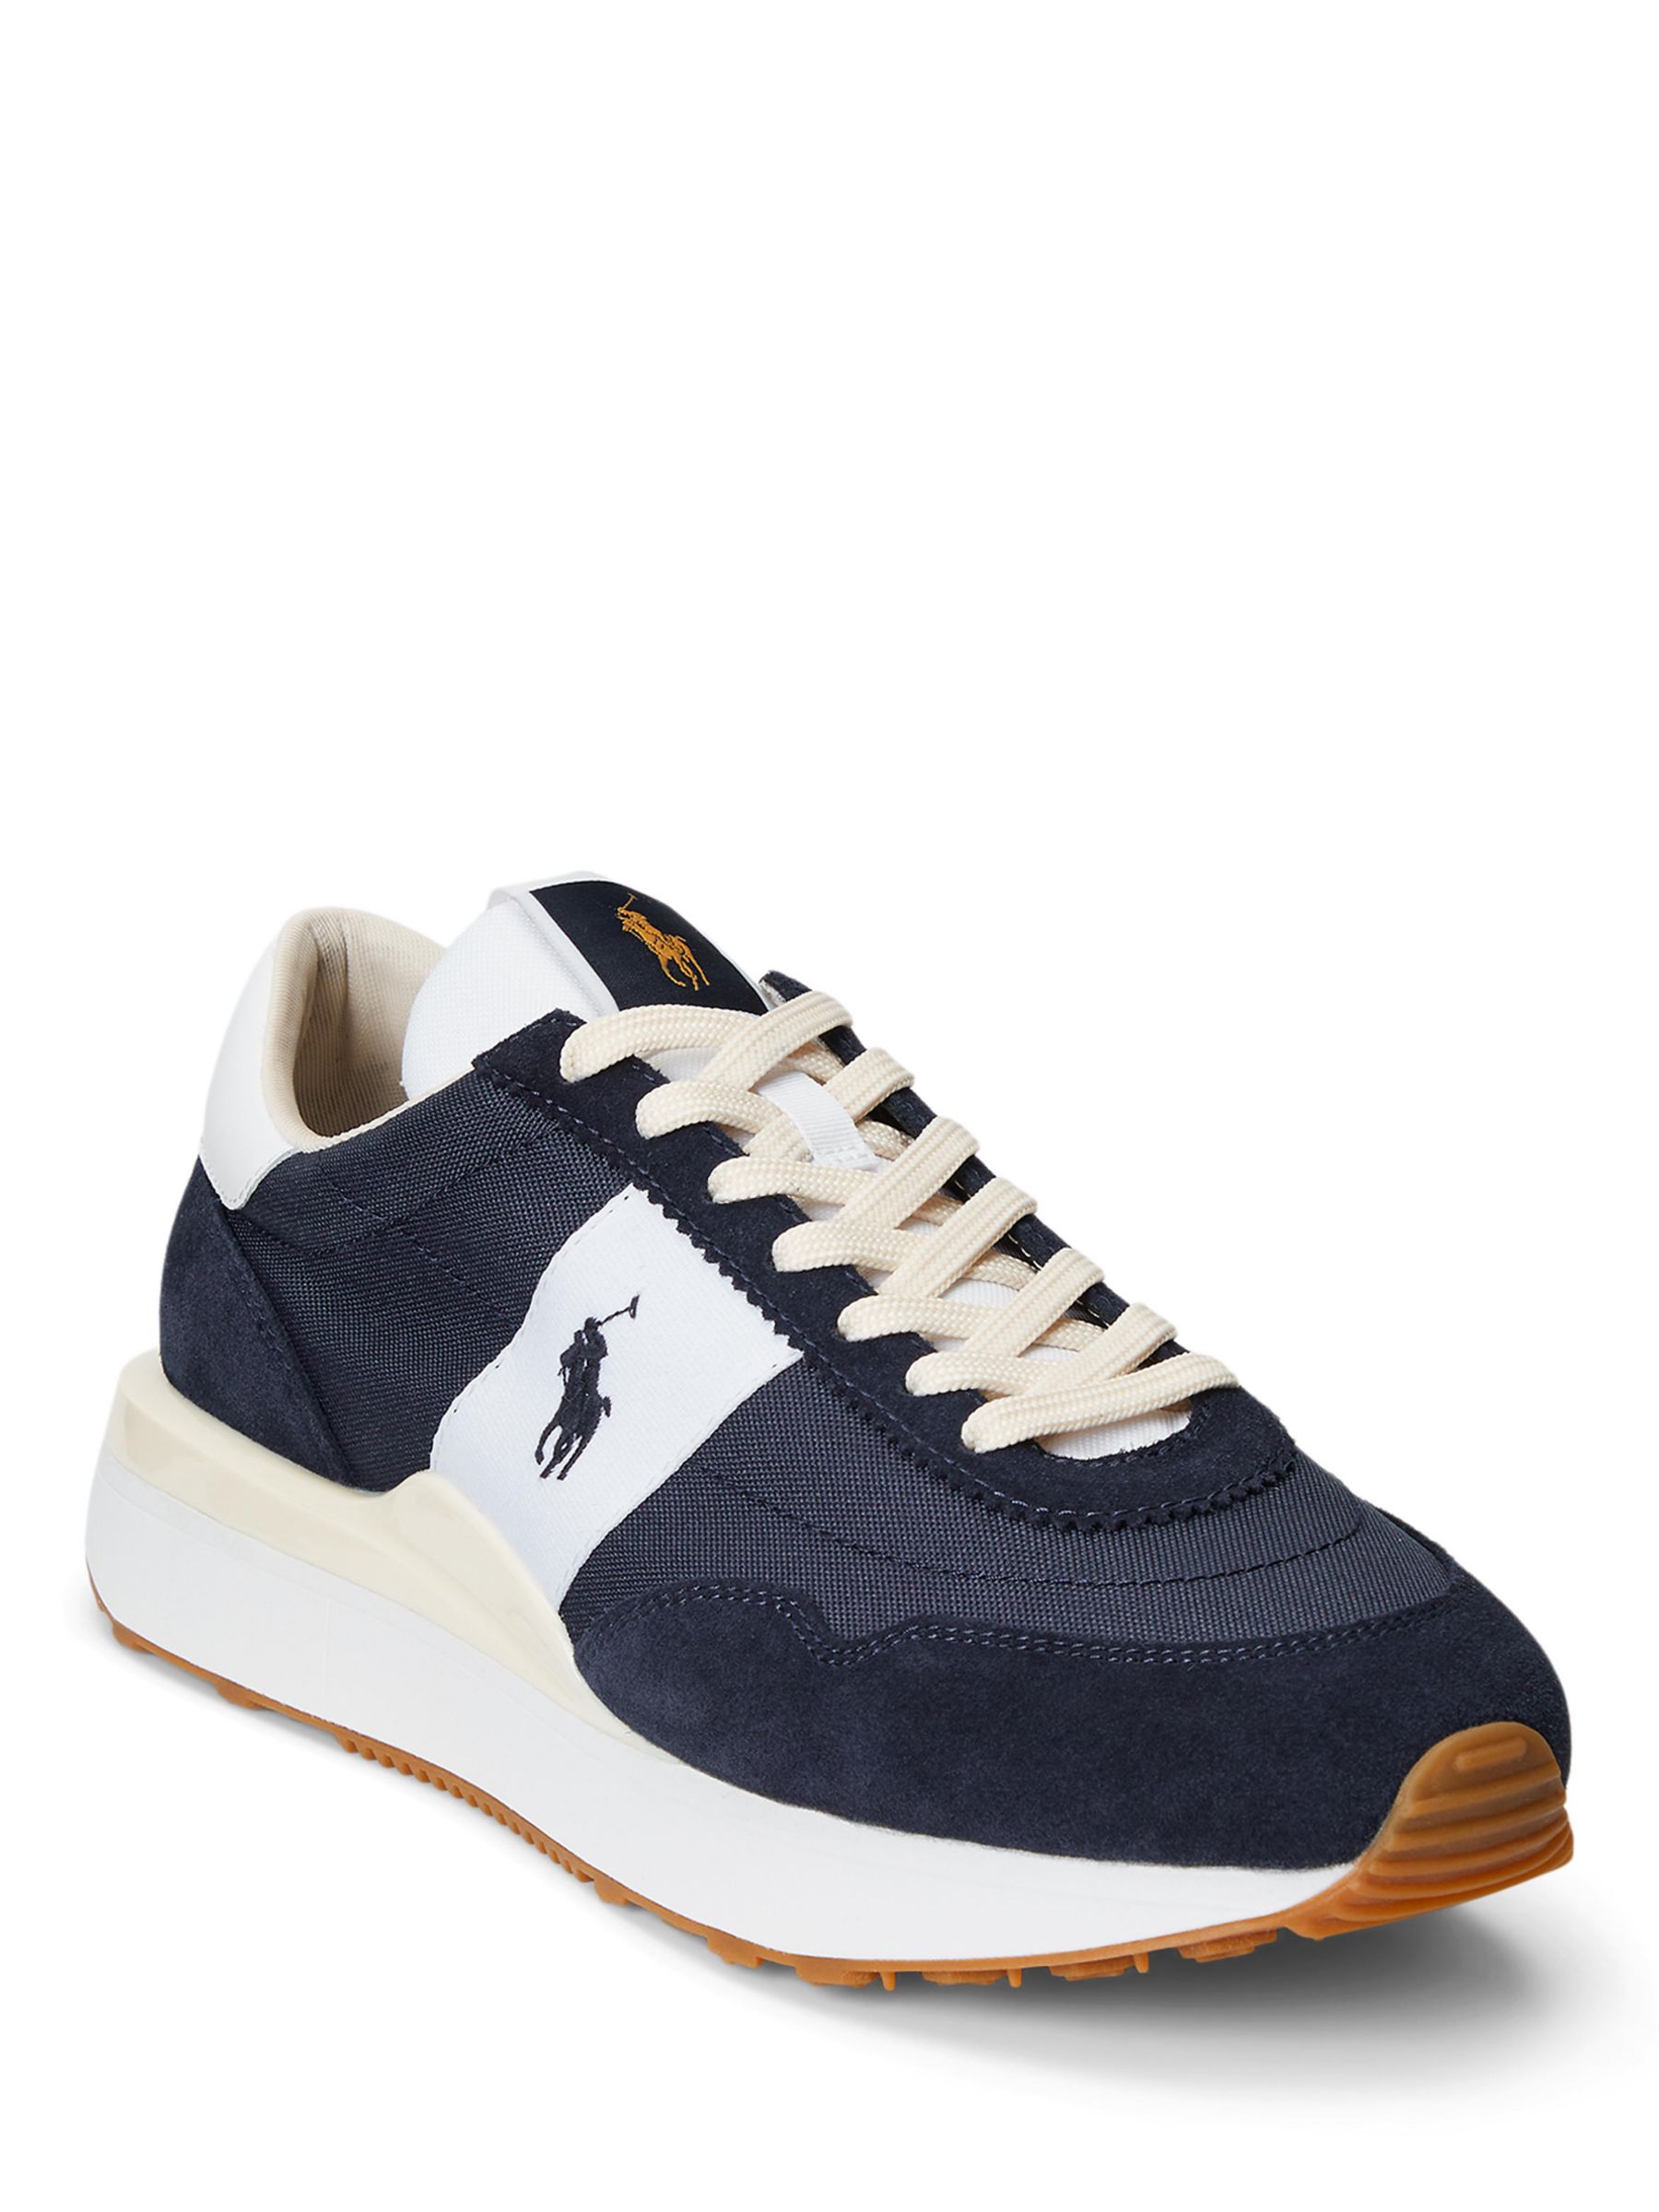 Polo Ralph Lauren Train 89 Suede Trainers, Navy at John Lewis & Partners